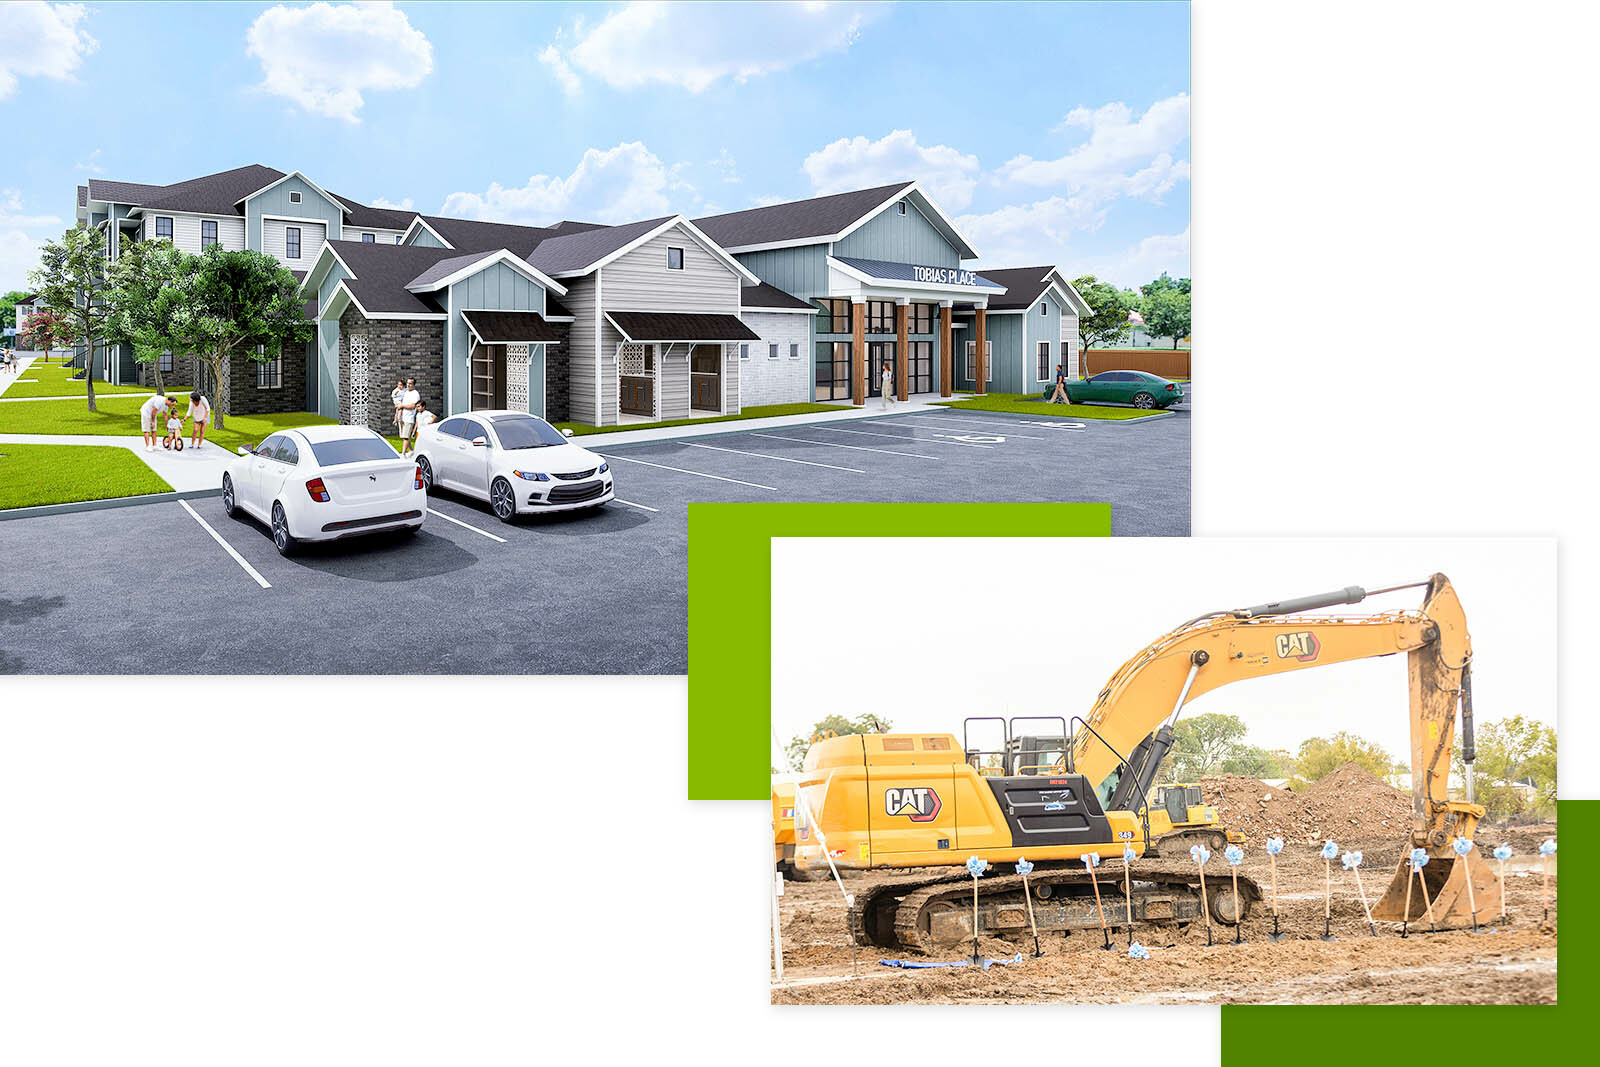 Tobias Place rendering and construction equipment